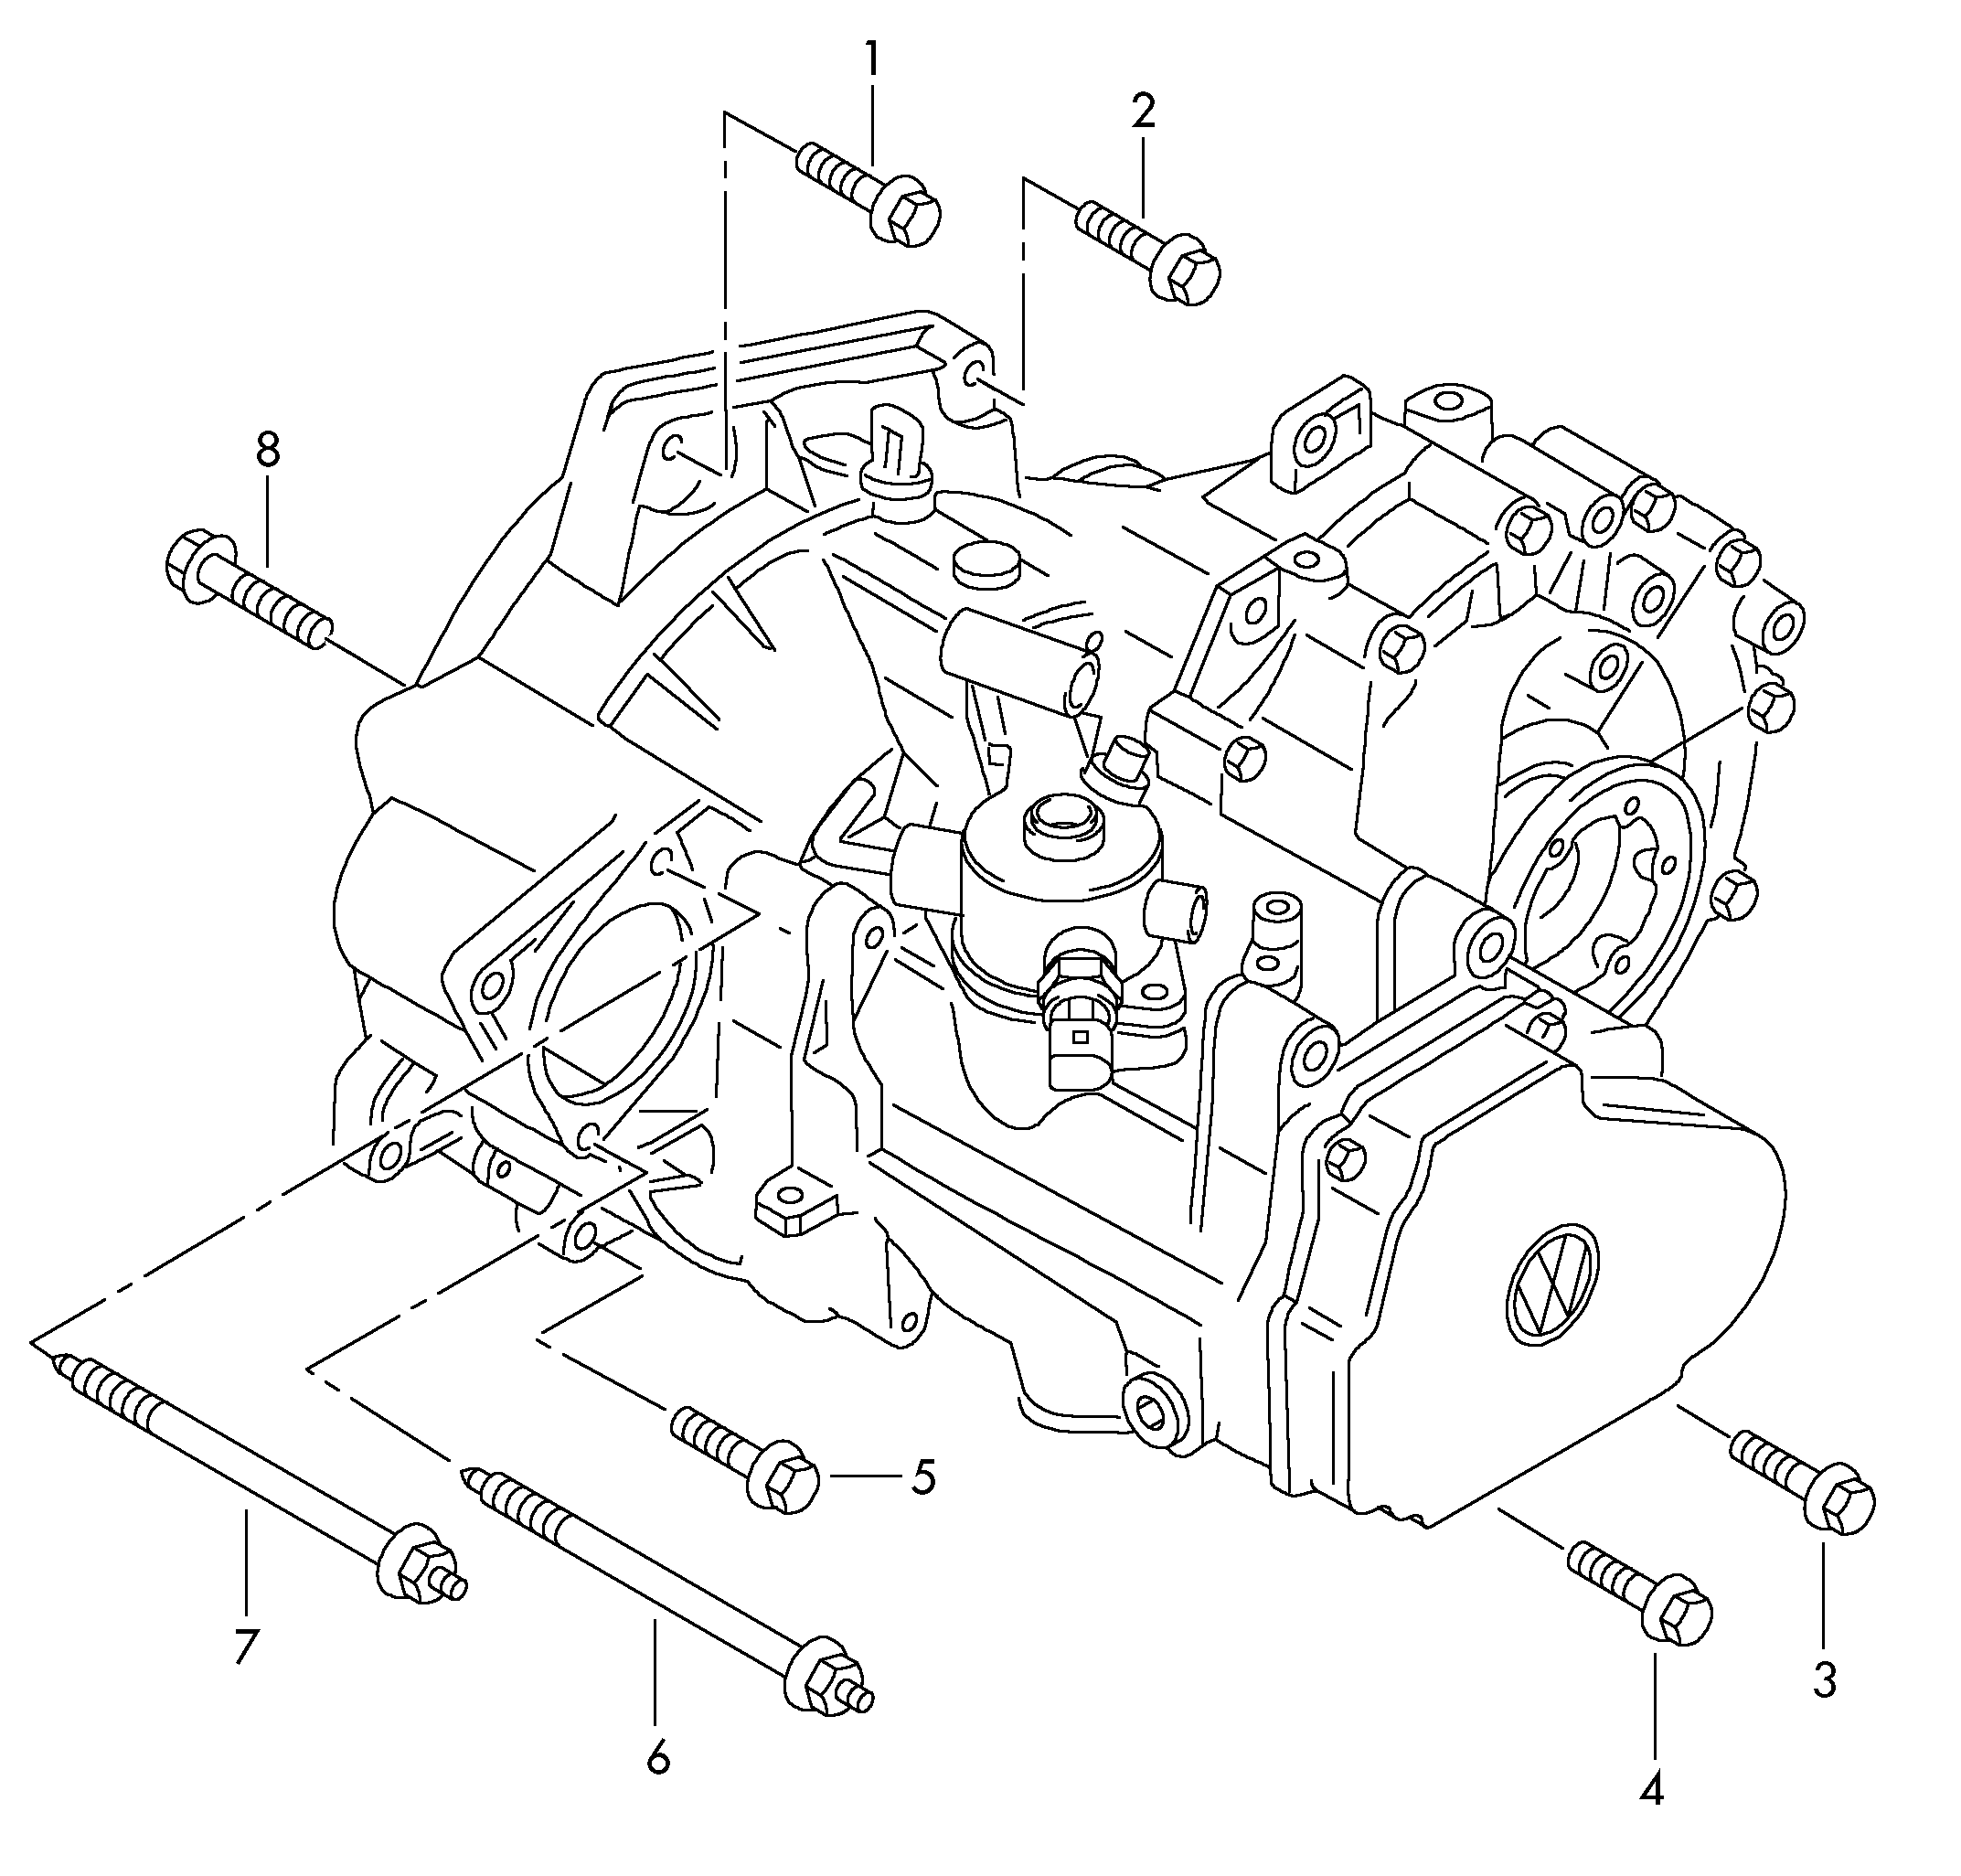 mounting parts for engine and<br>transmission5-speed manual transmission  - Rapid - rap